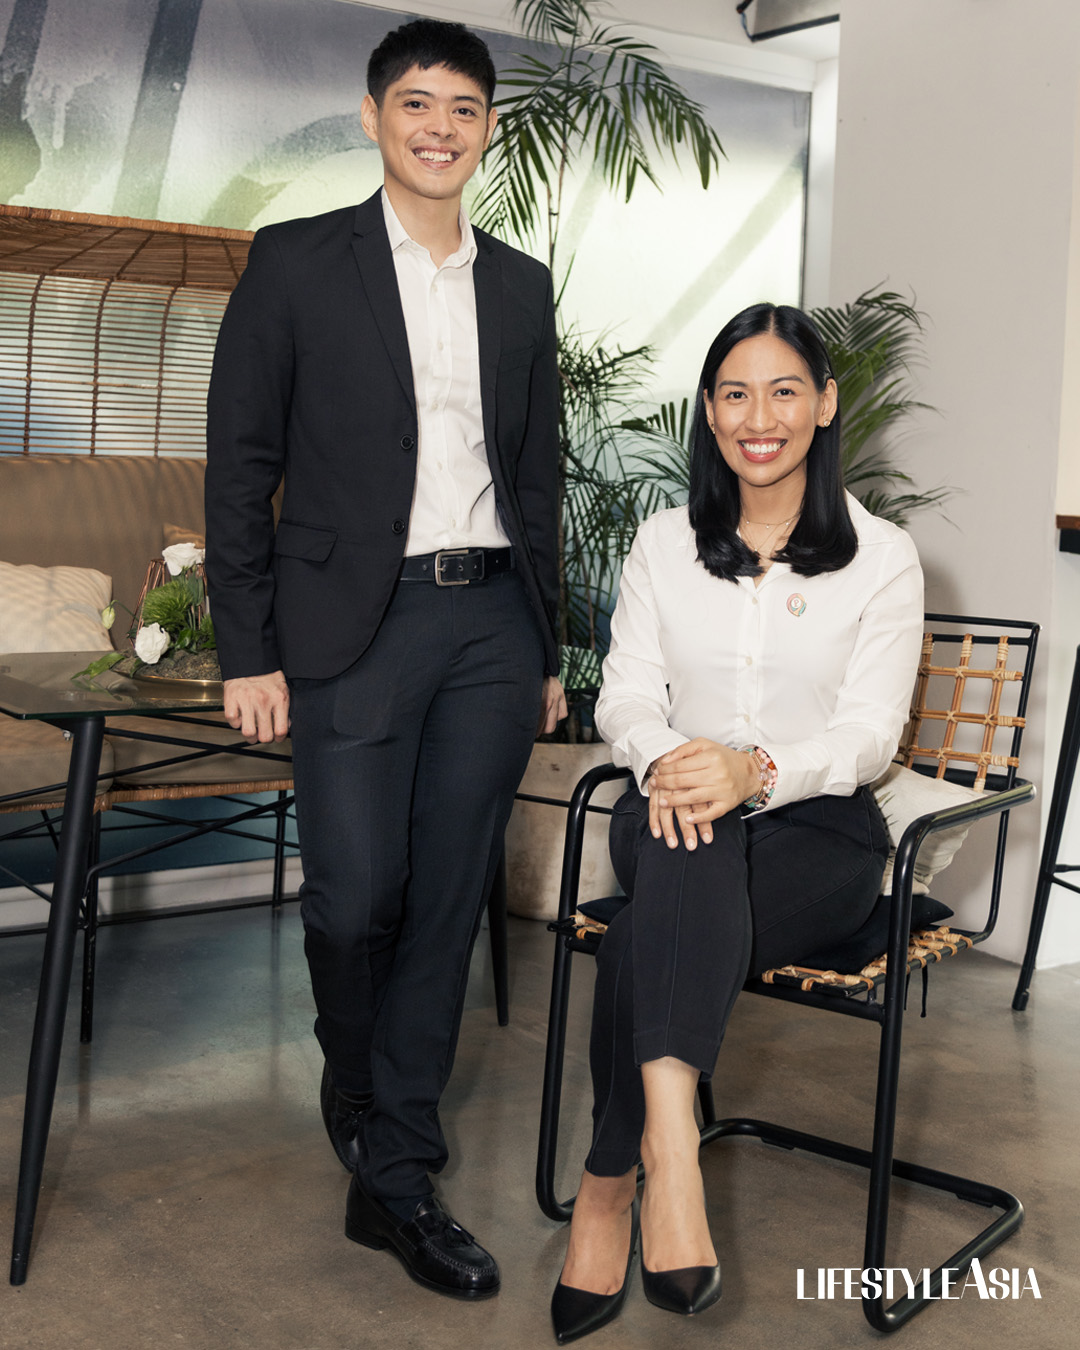 Miko Cornejo (left) and Claire Ongcangco (right) of Parlon Beauty and Wellness Technologies, Inc.